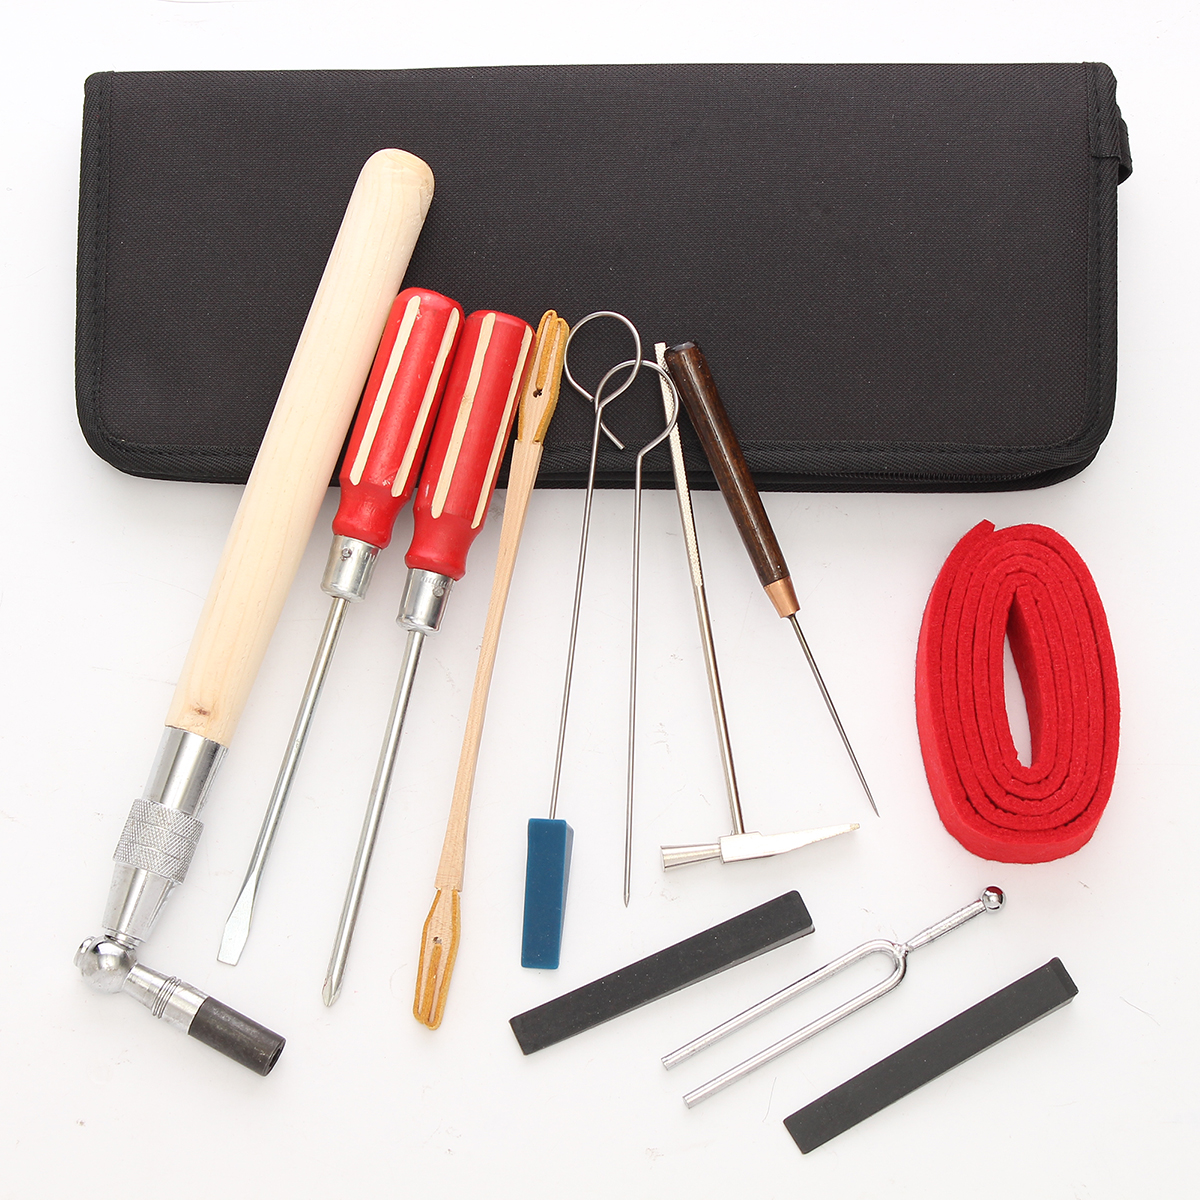 13Pcs-Professional-Piano-Tuning-Maintenance-Tool-Kits-Wrench-Hammer-Screwdriver-with-Case-US-1340718